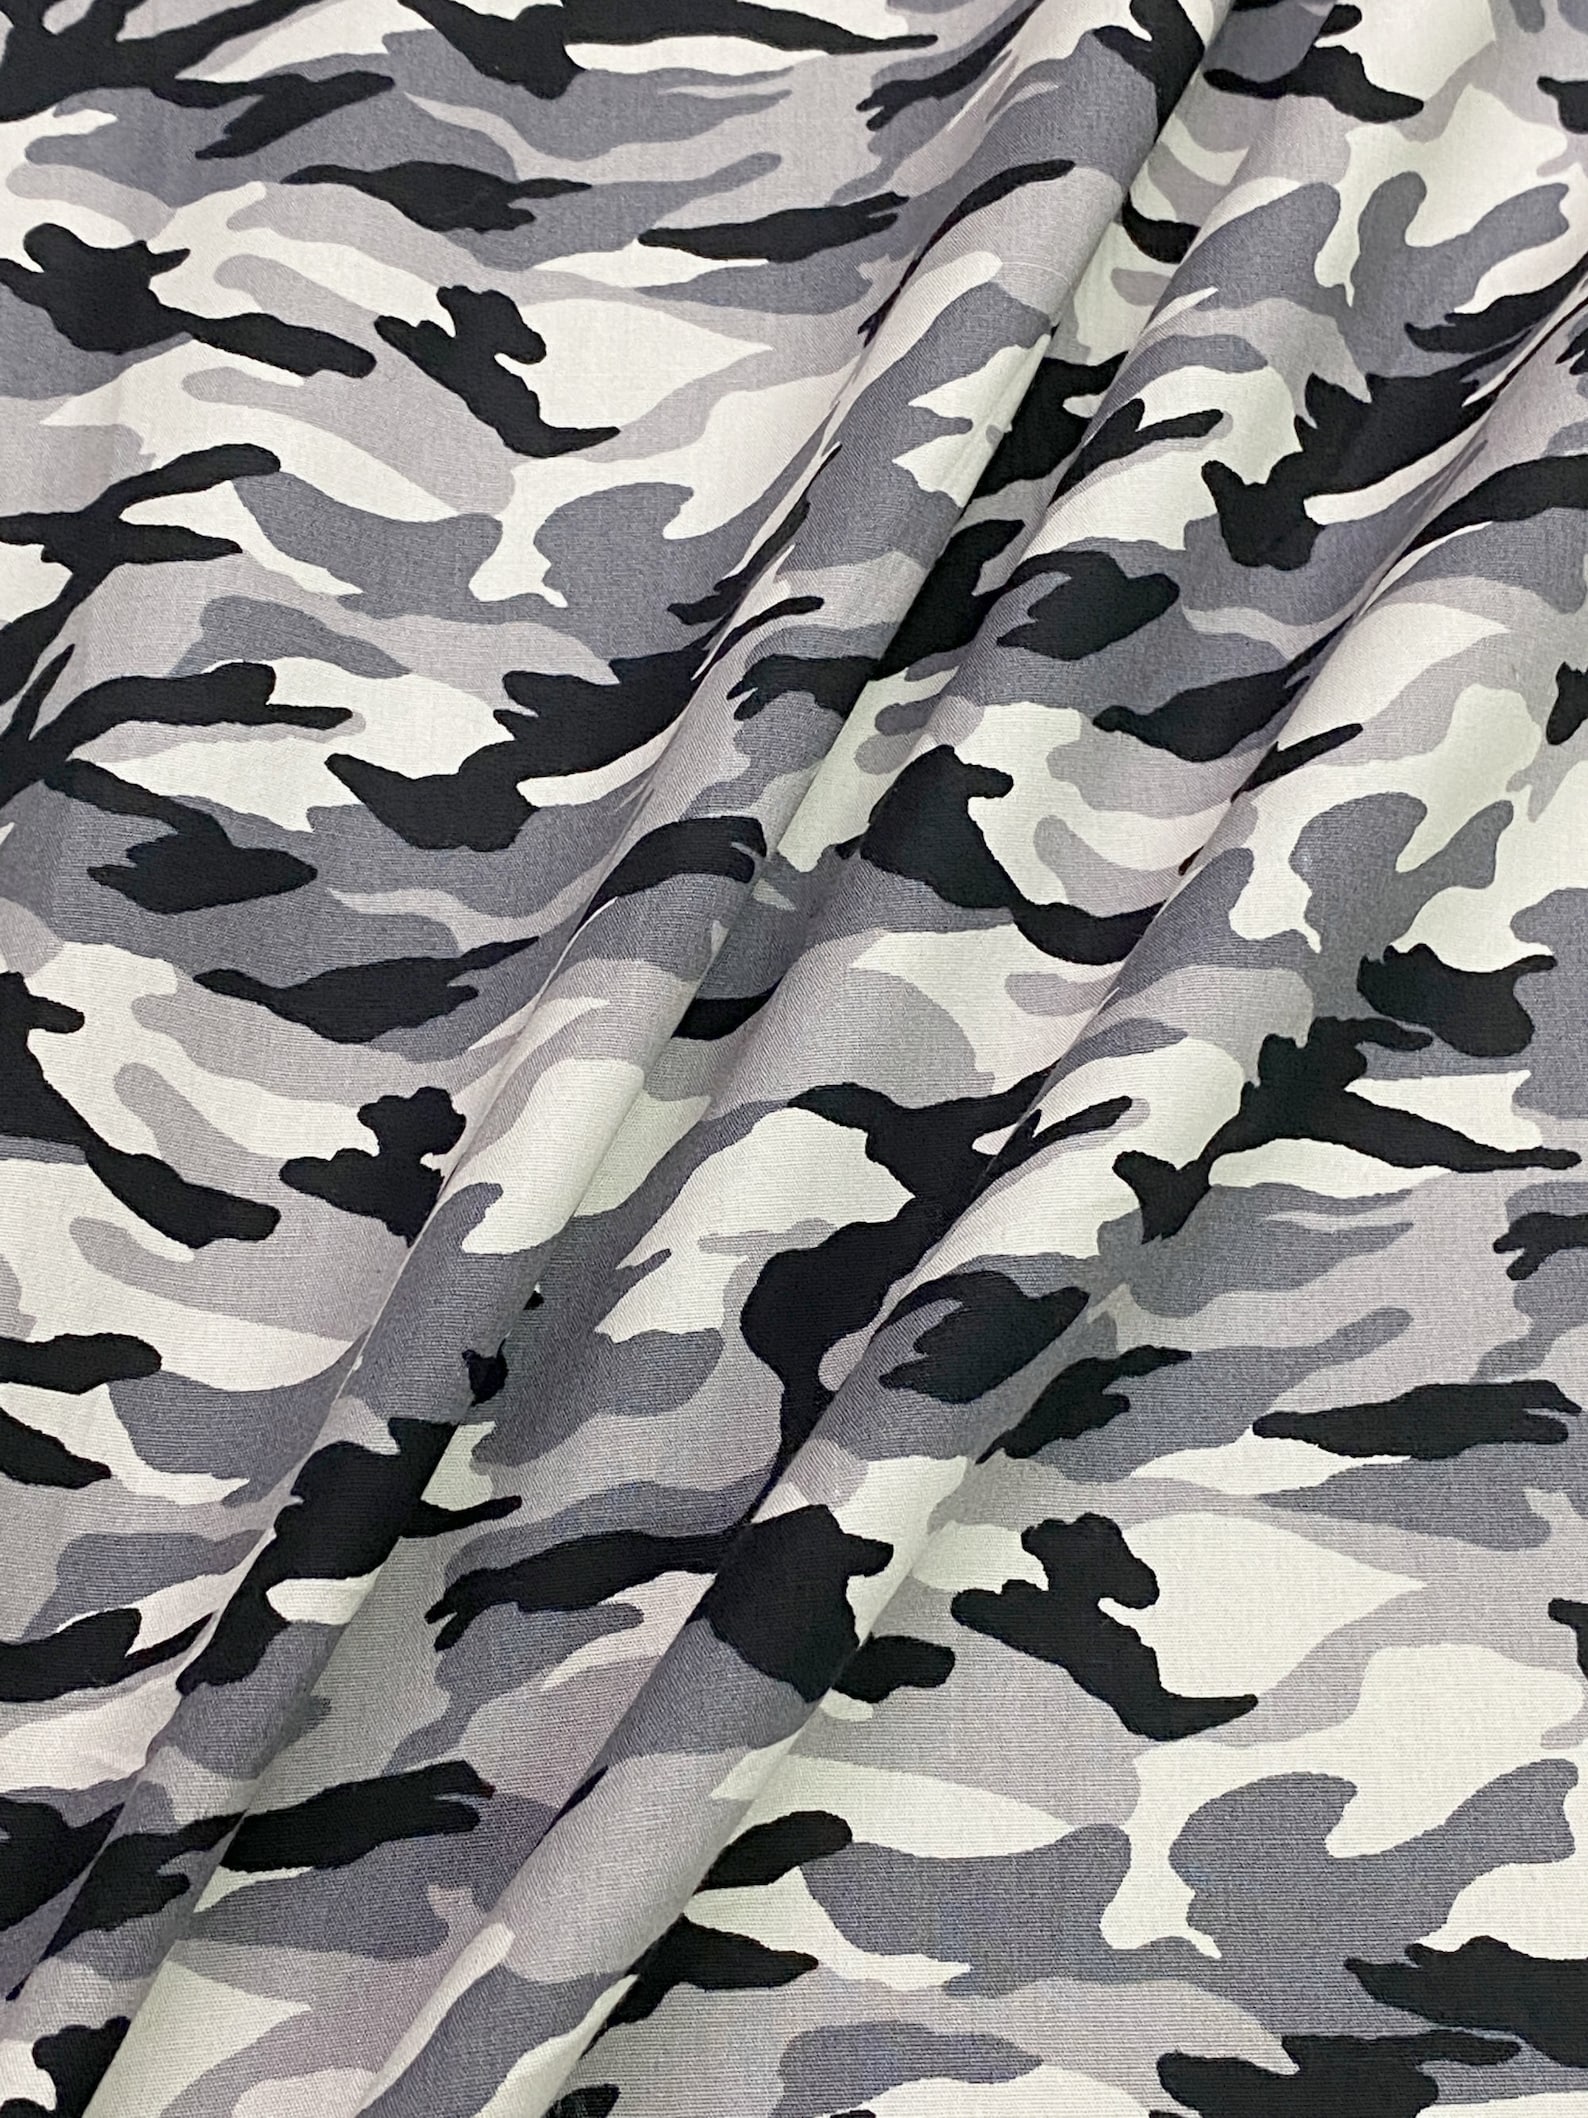 Army Camouflage 100% Cotton Grays Camo Print Fabric Material | Etsy